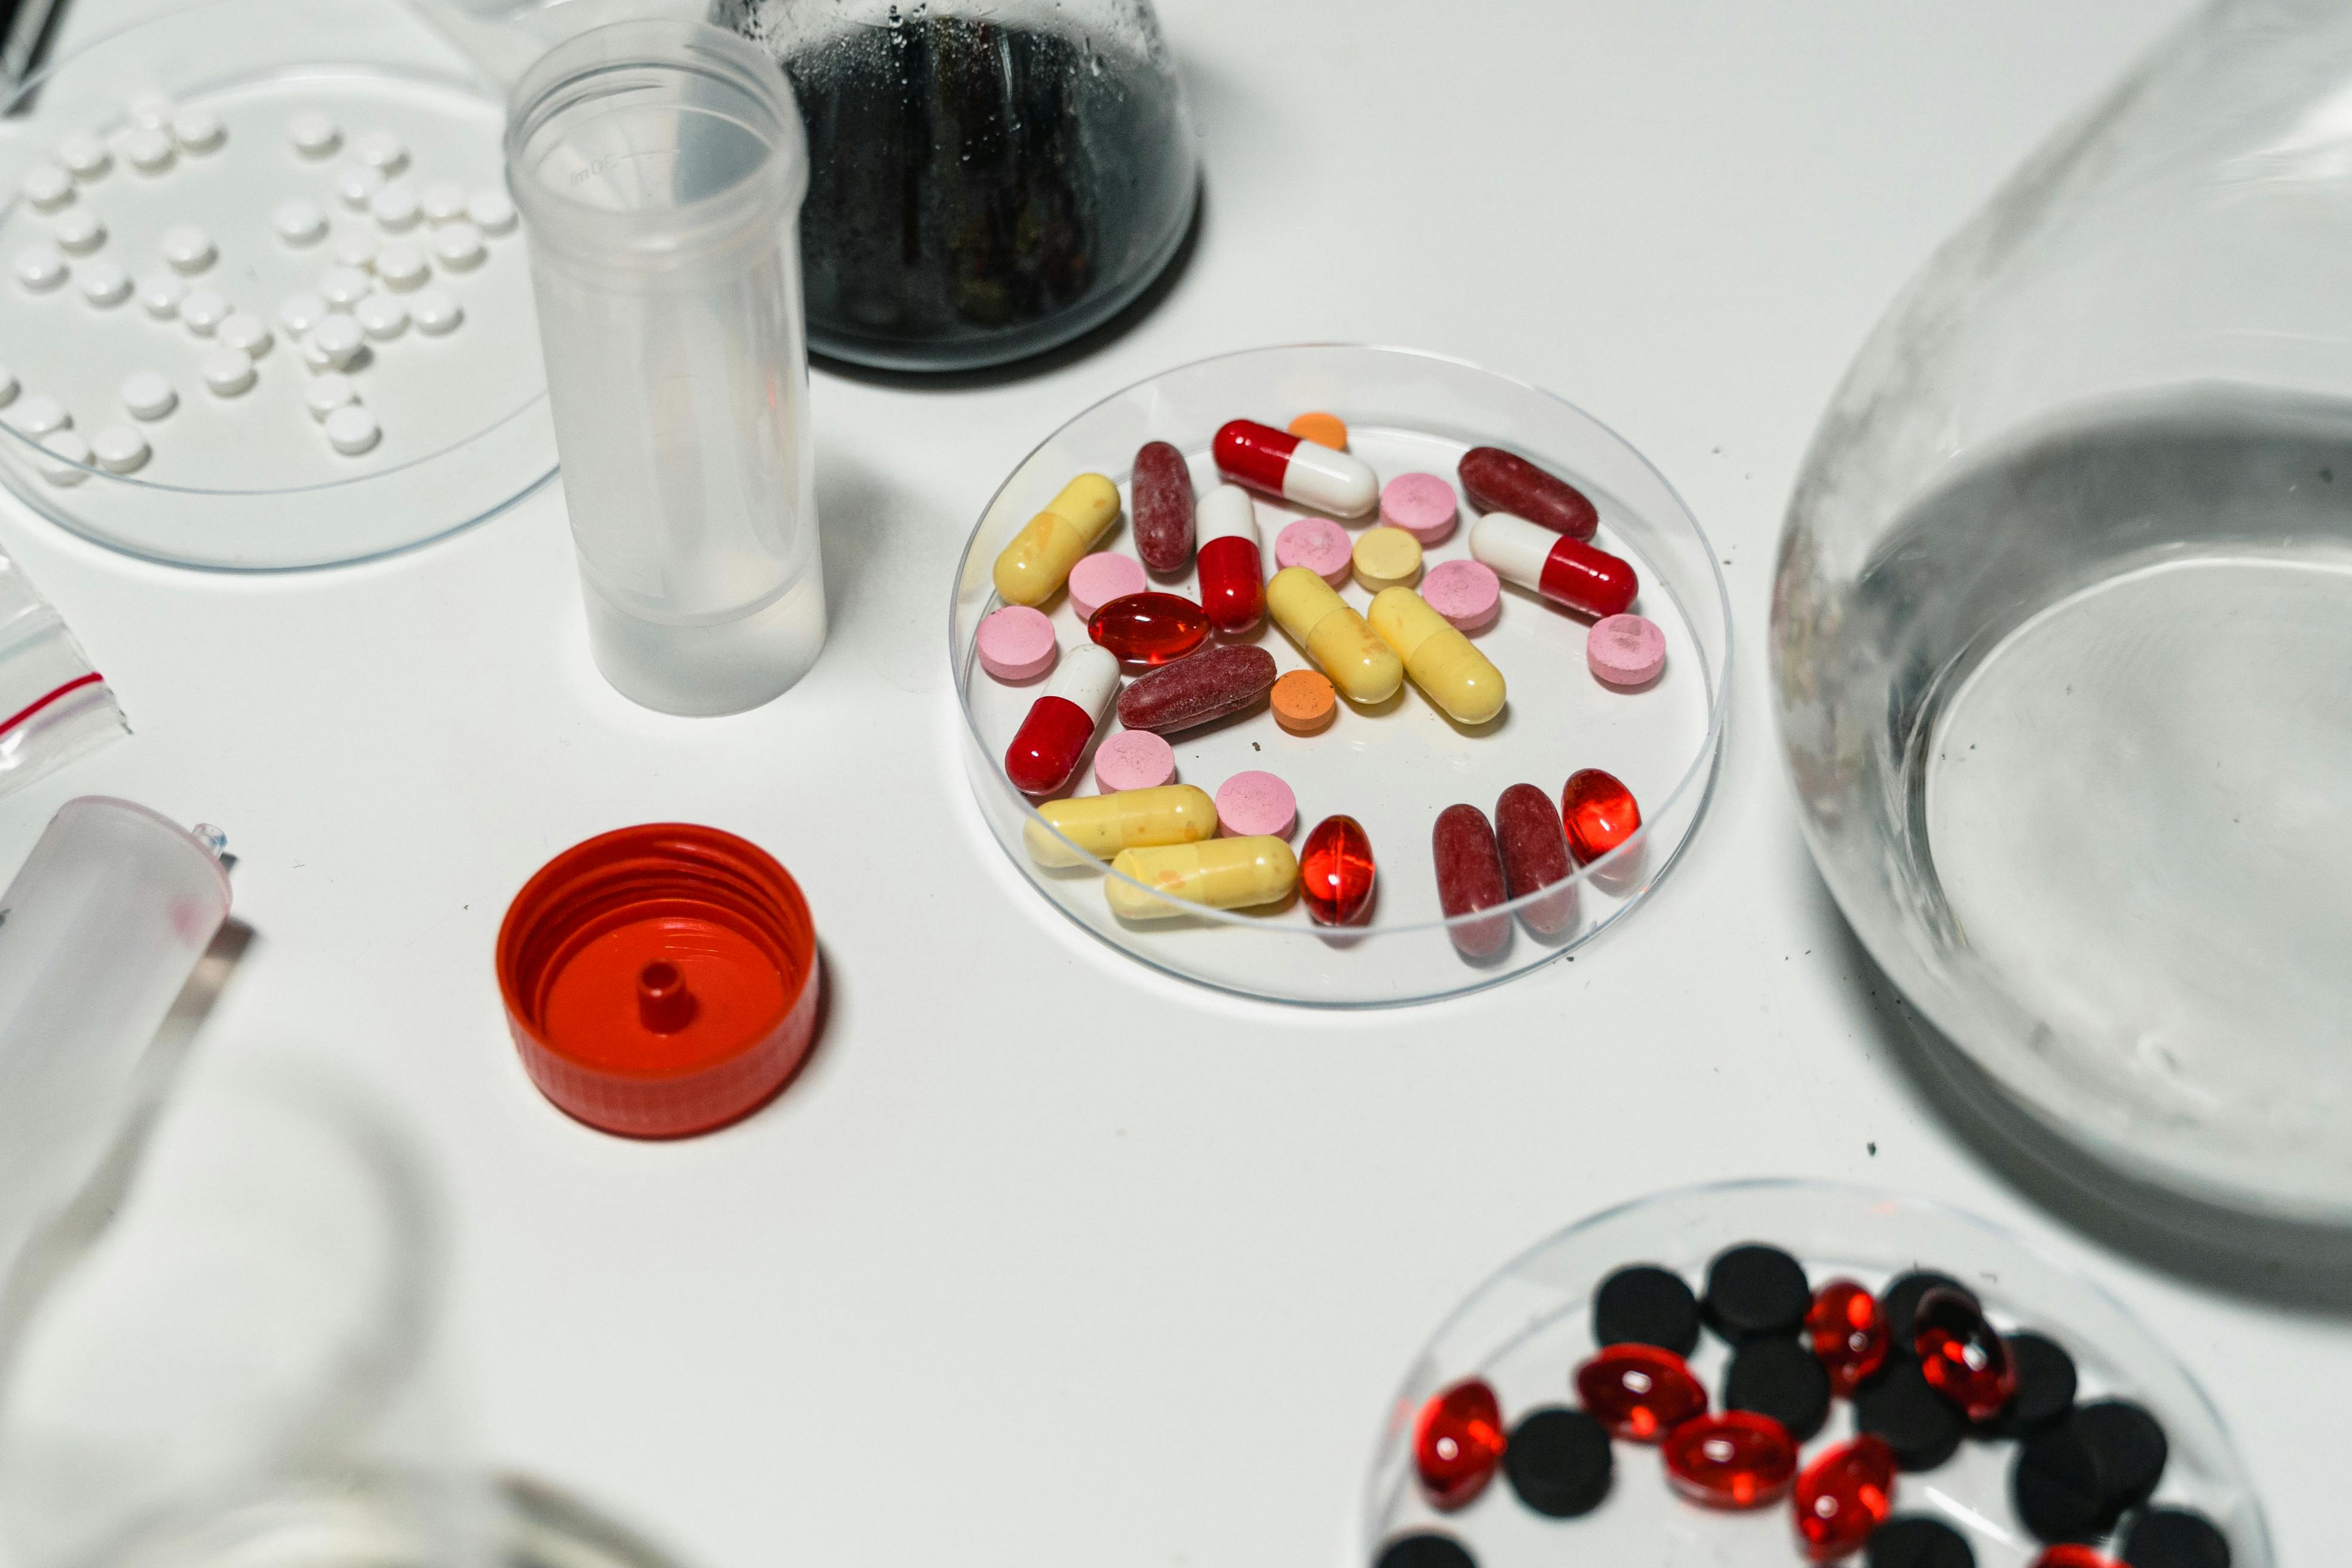 Drugs Photos, Download The BEST Free Drugs Stock Photos & HD Images